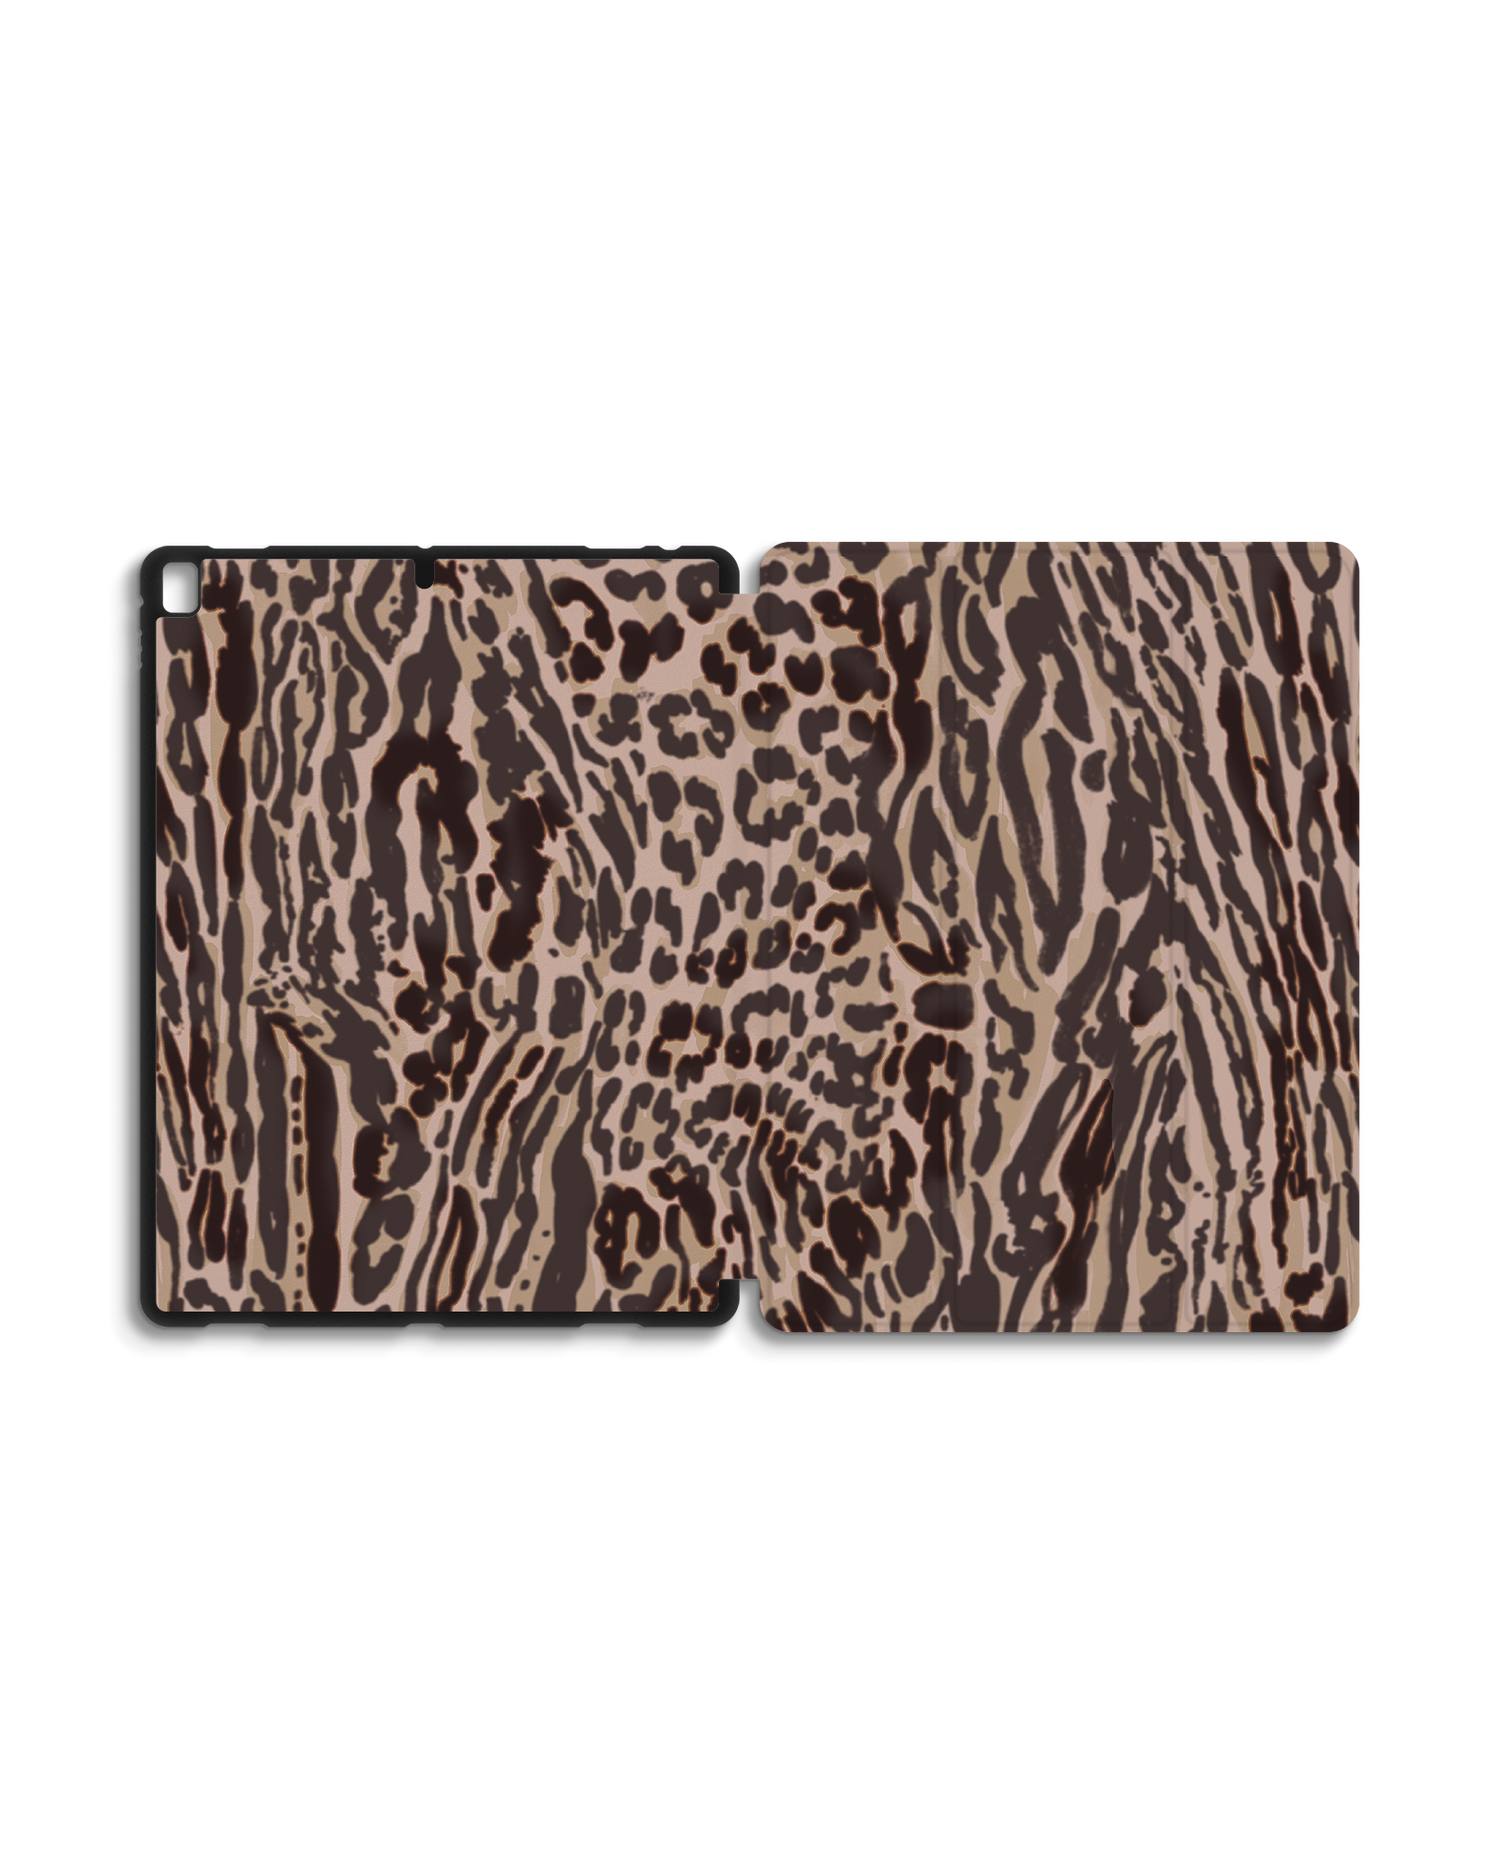 Animal Skin Tough Love iPad Case with Pencil Holder for Apple iPad Pro 2 12.9